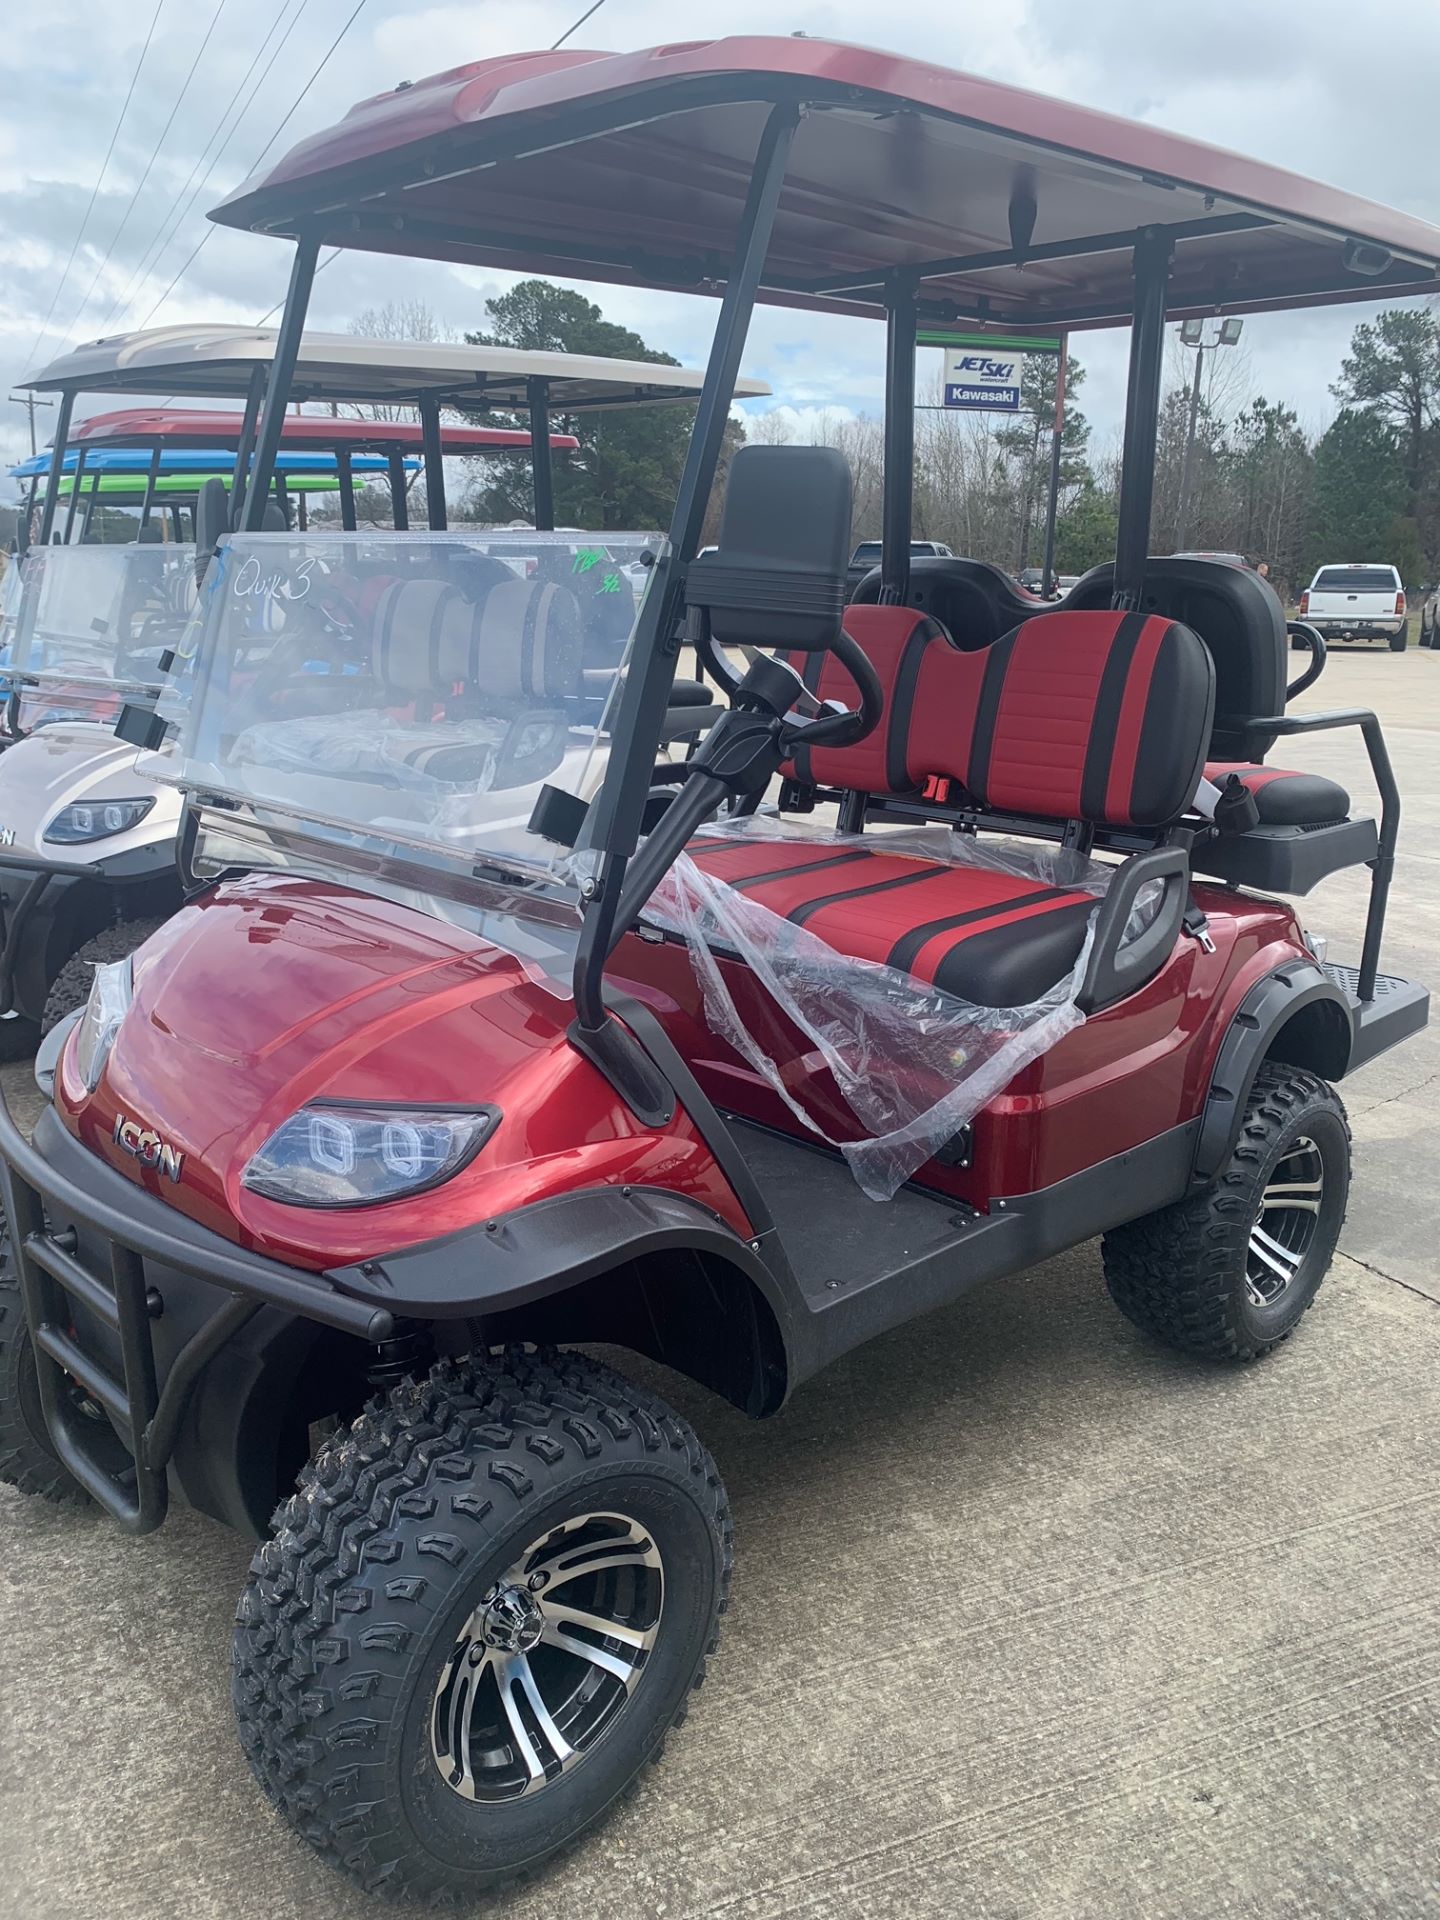 2022 ICON I40L TORCH RED W/BLACK SEATS in Decatur, Alabama - Photo 1